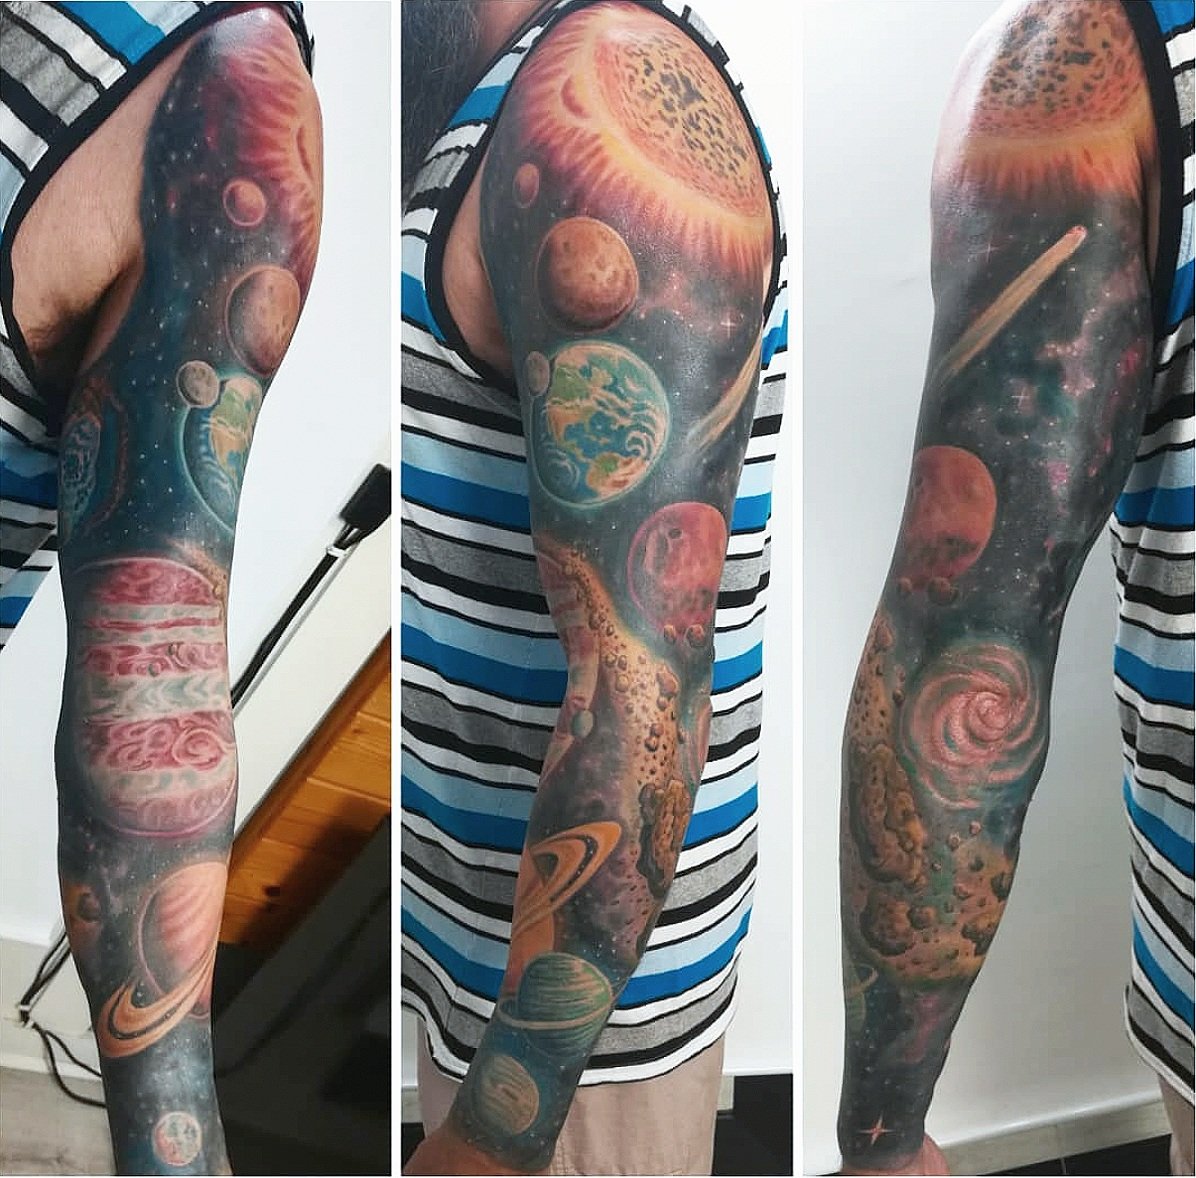 Galaxy Tattoos That Are out of This World ...